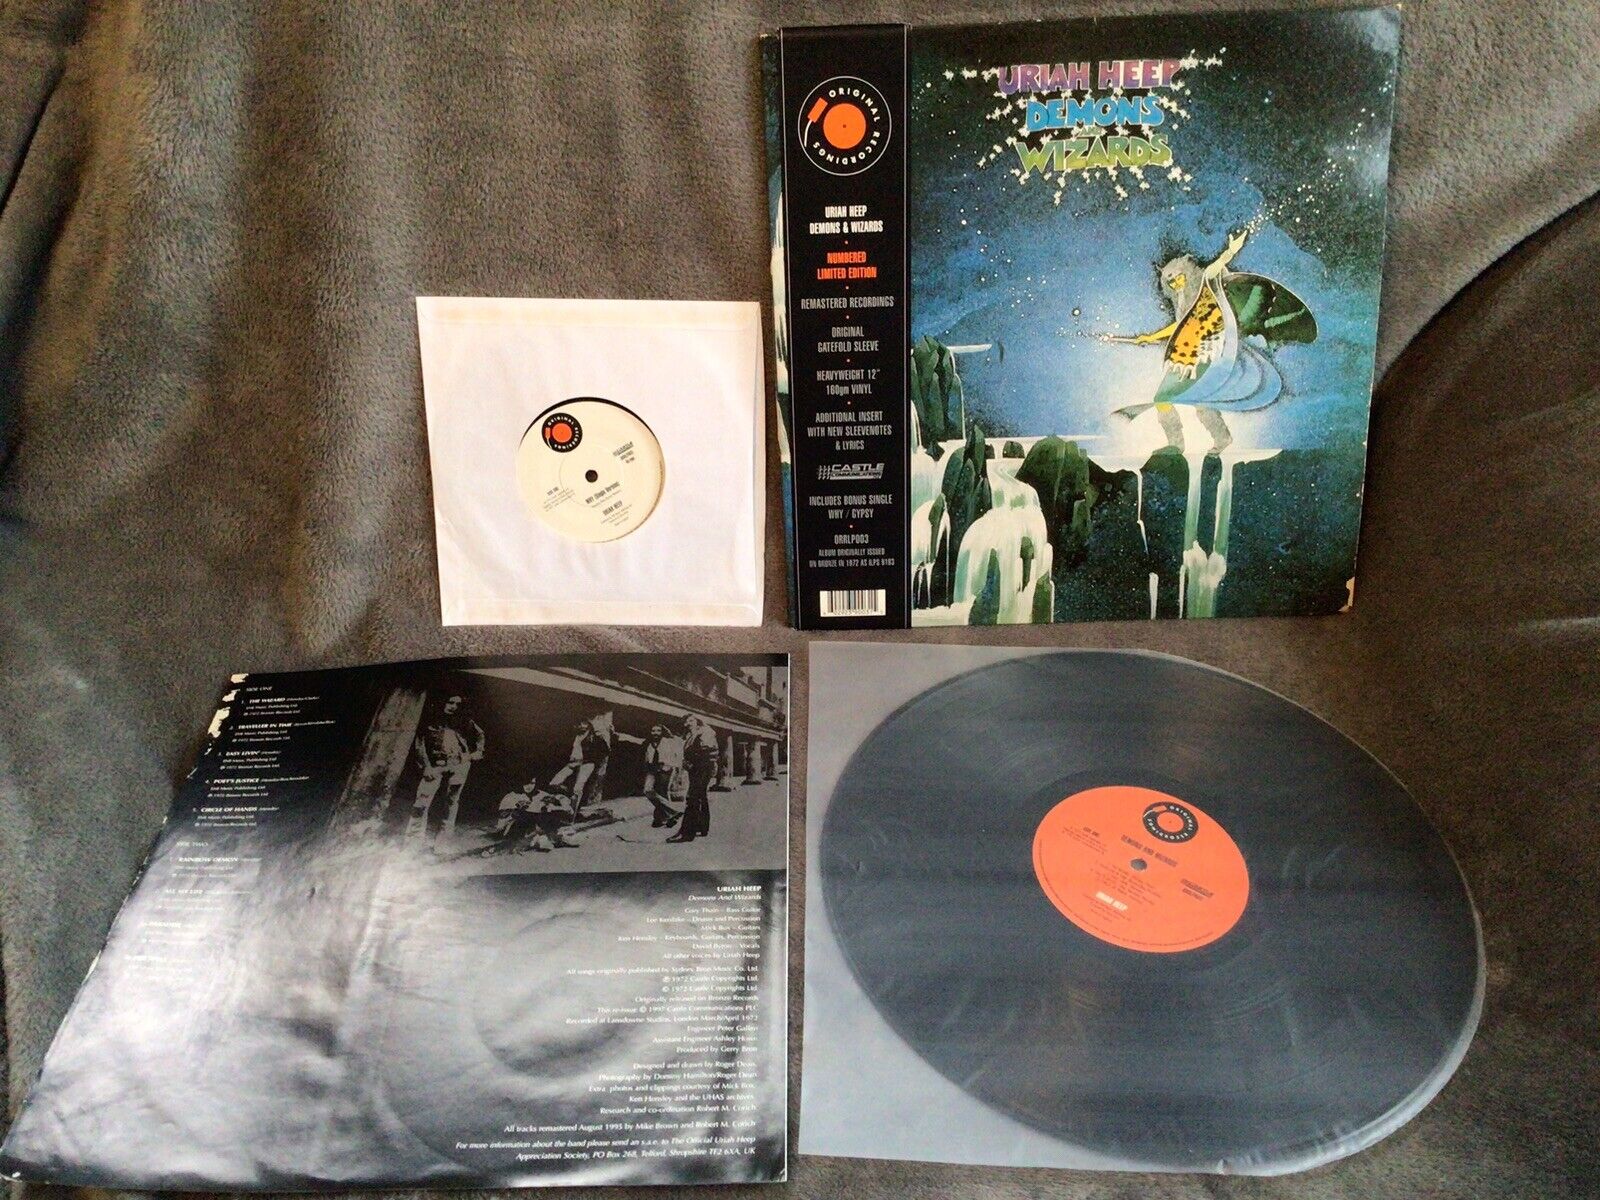 URIAH HEEP Demons and Wizards LP 1997 Remastered Ltd Edition + 7” Single LOOK